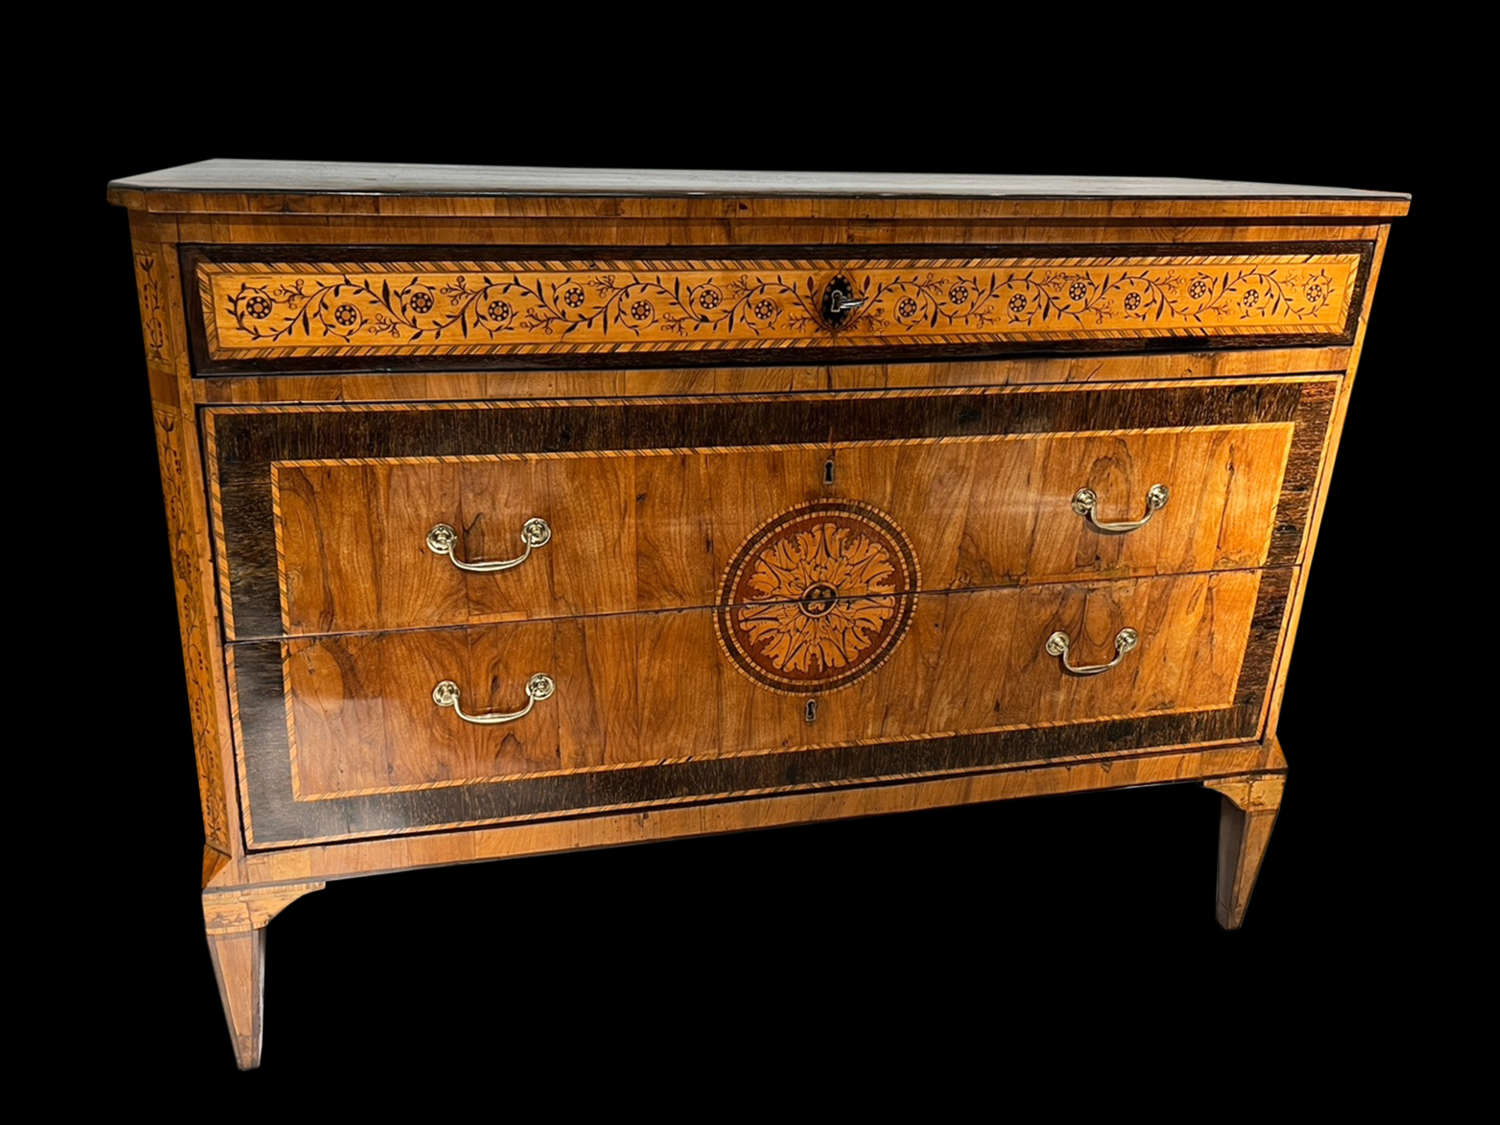 A GOOD MARQUETRY COMMODE FROM BERGAMO ITALY C.1785